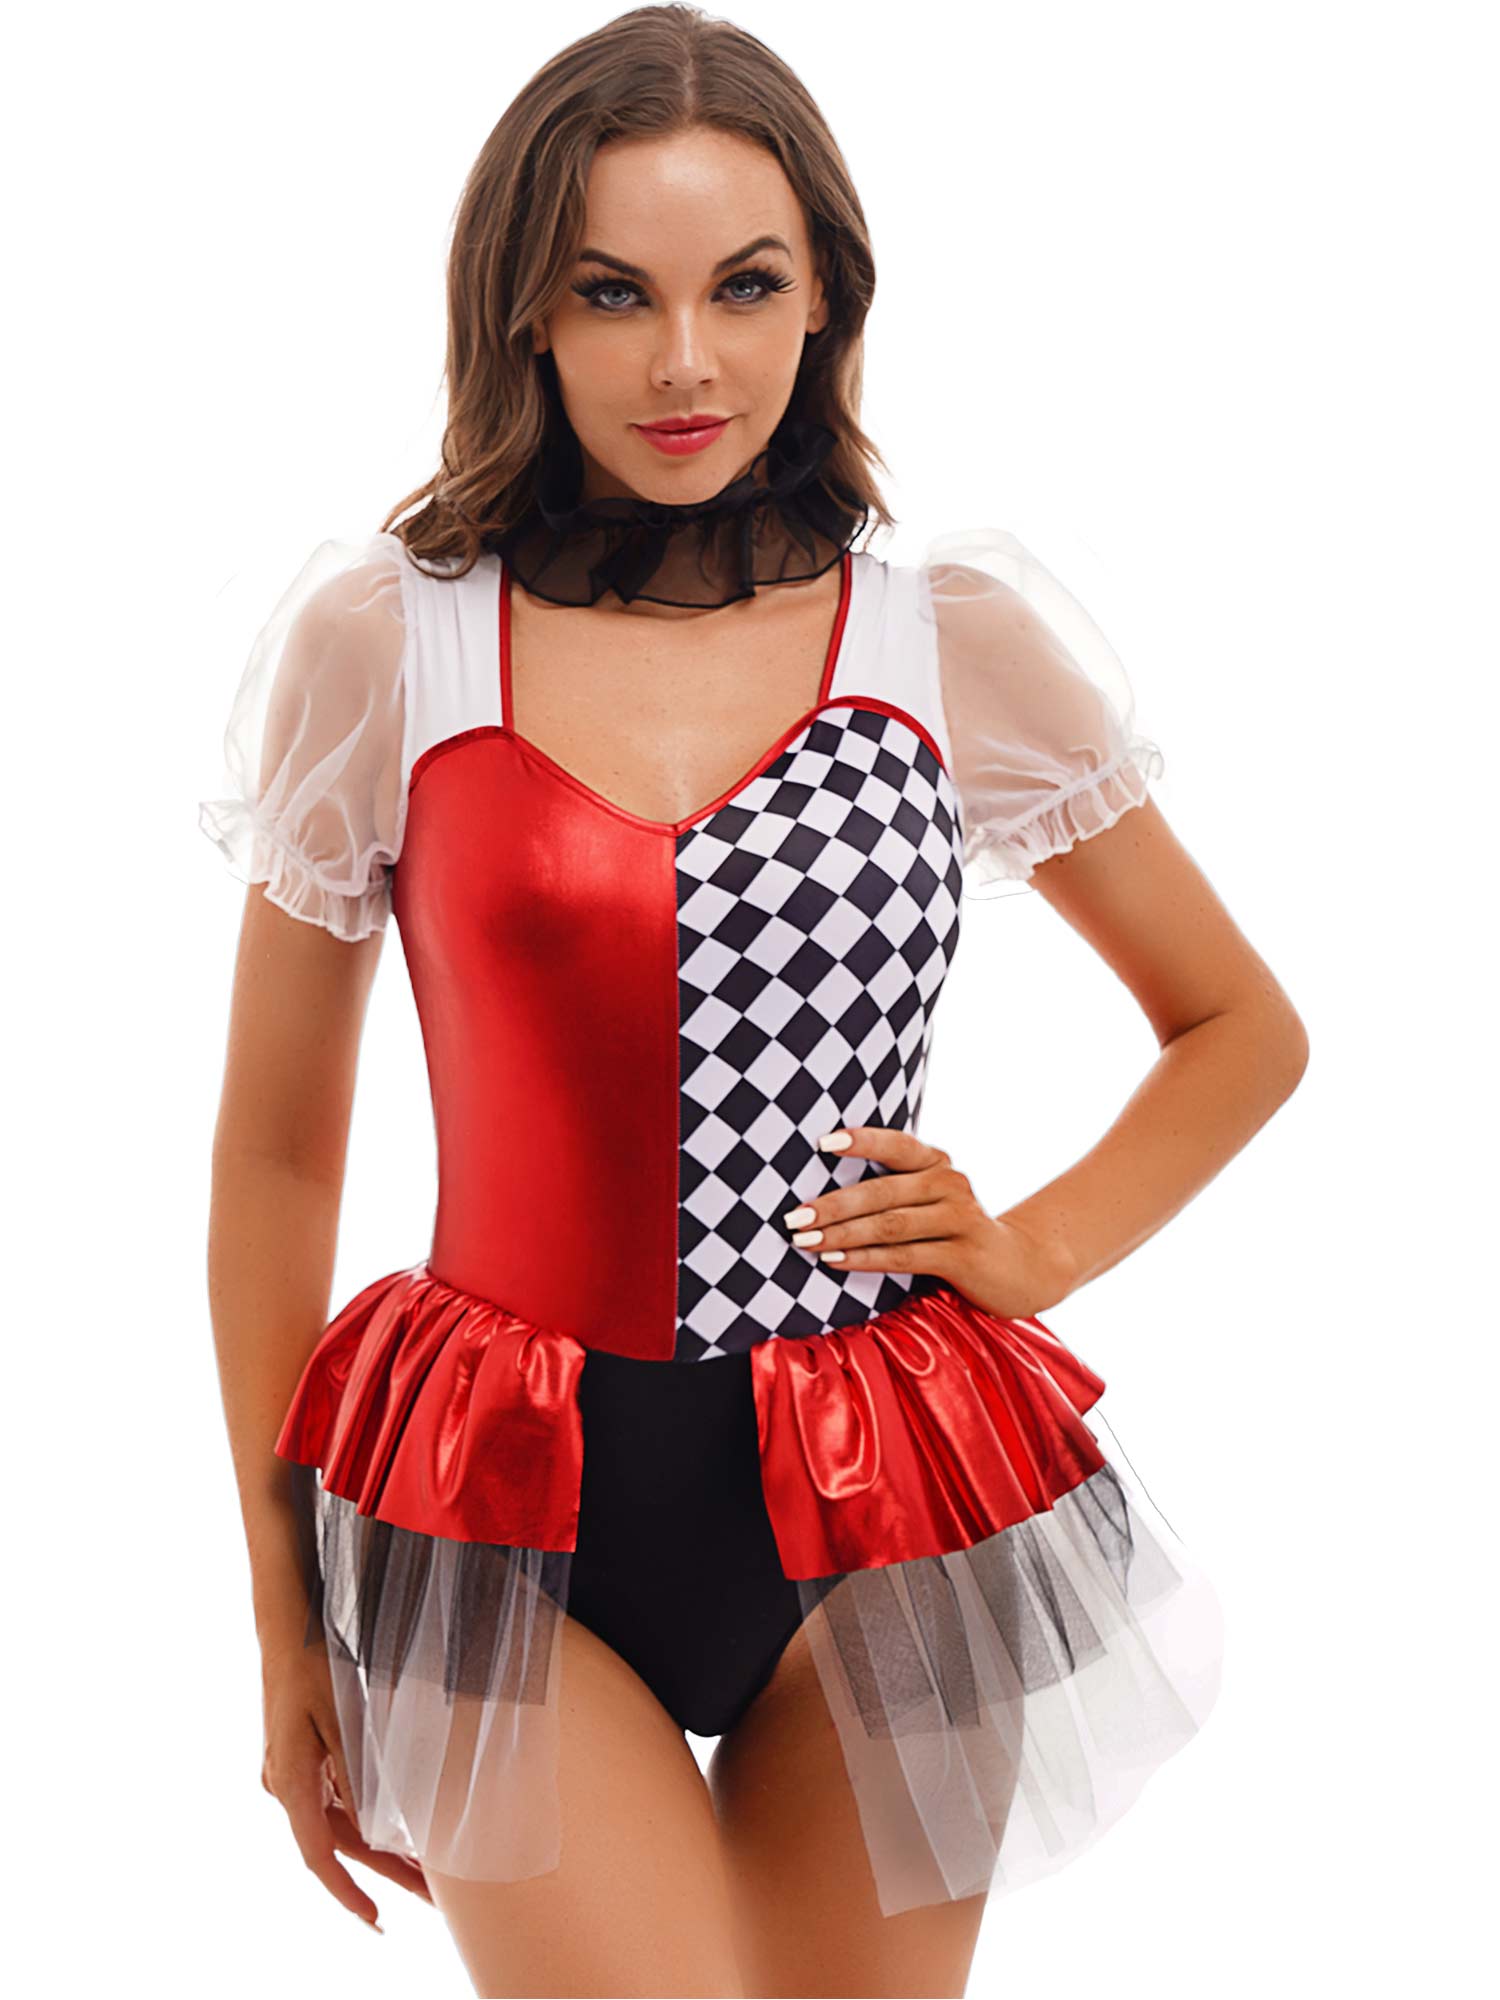 Sexy Clown Outfits